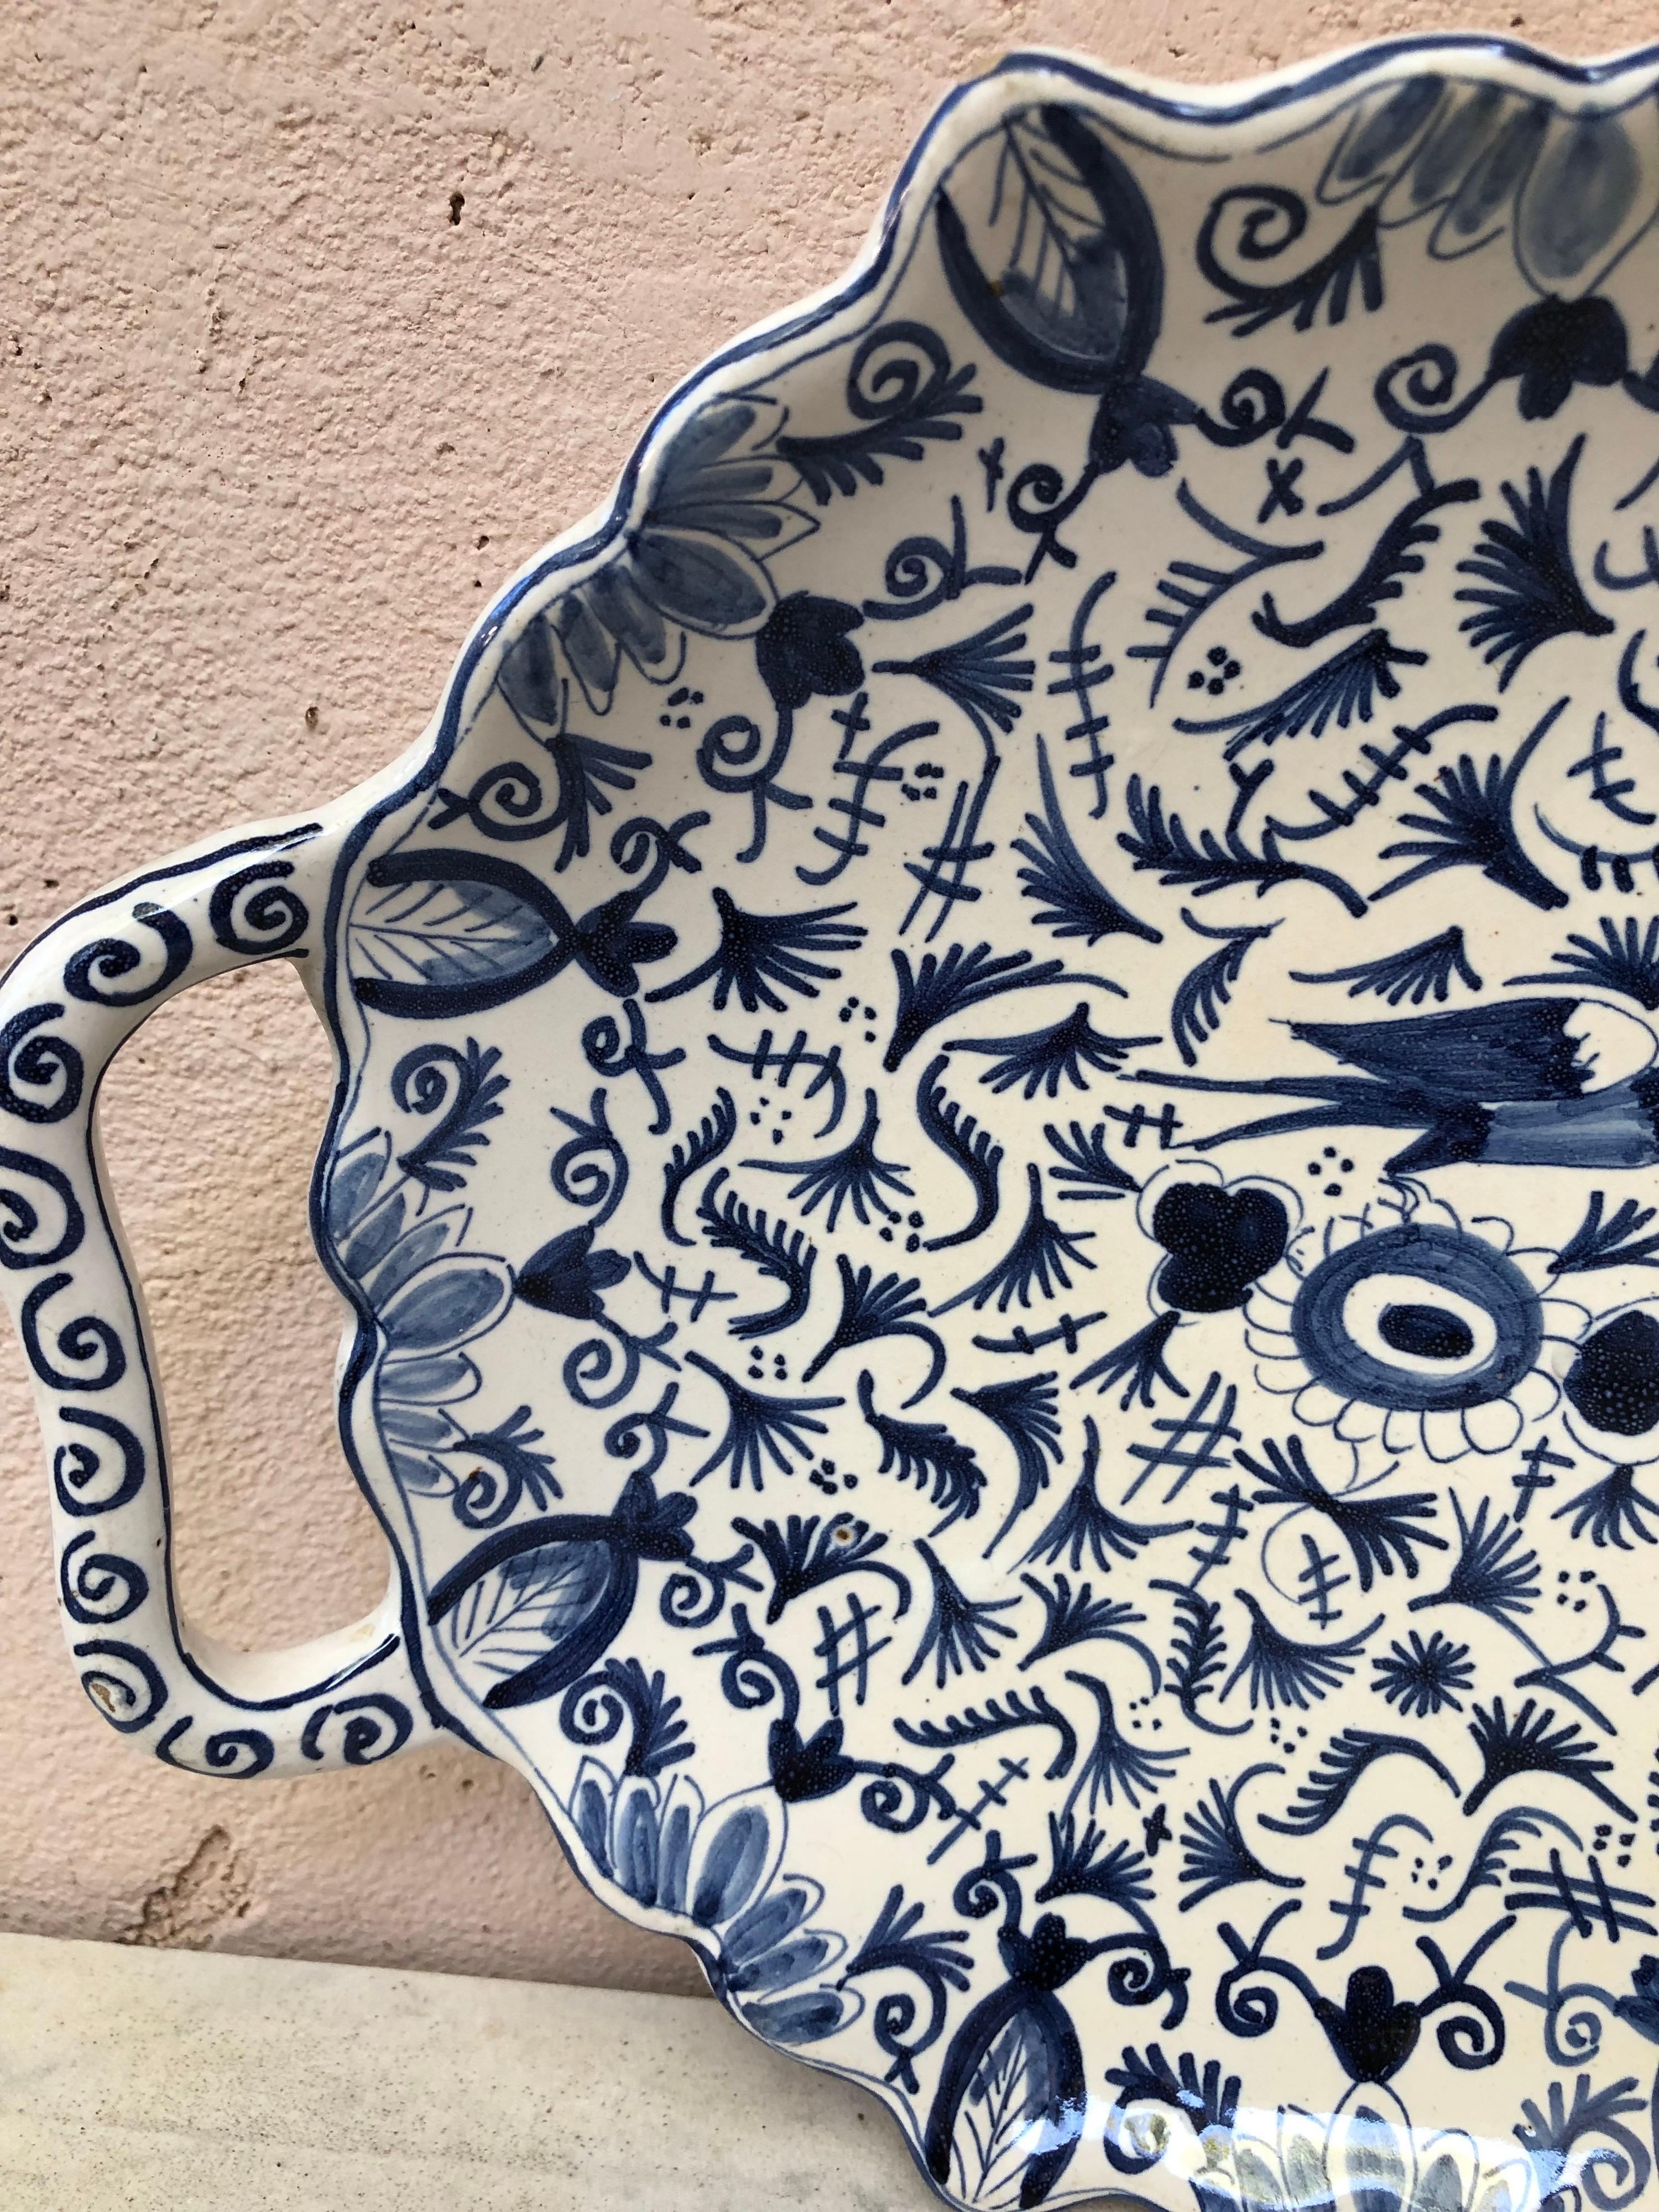 Rustic Blue & White Delft Faience Handled Platter circa 1920